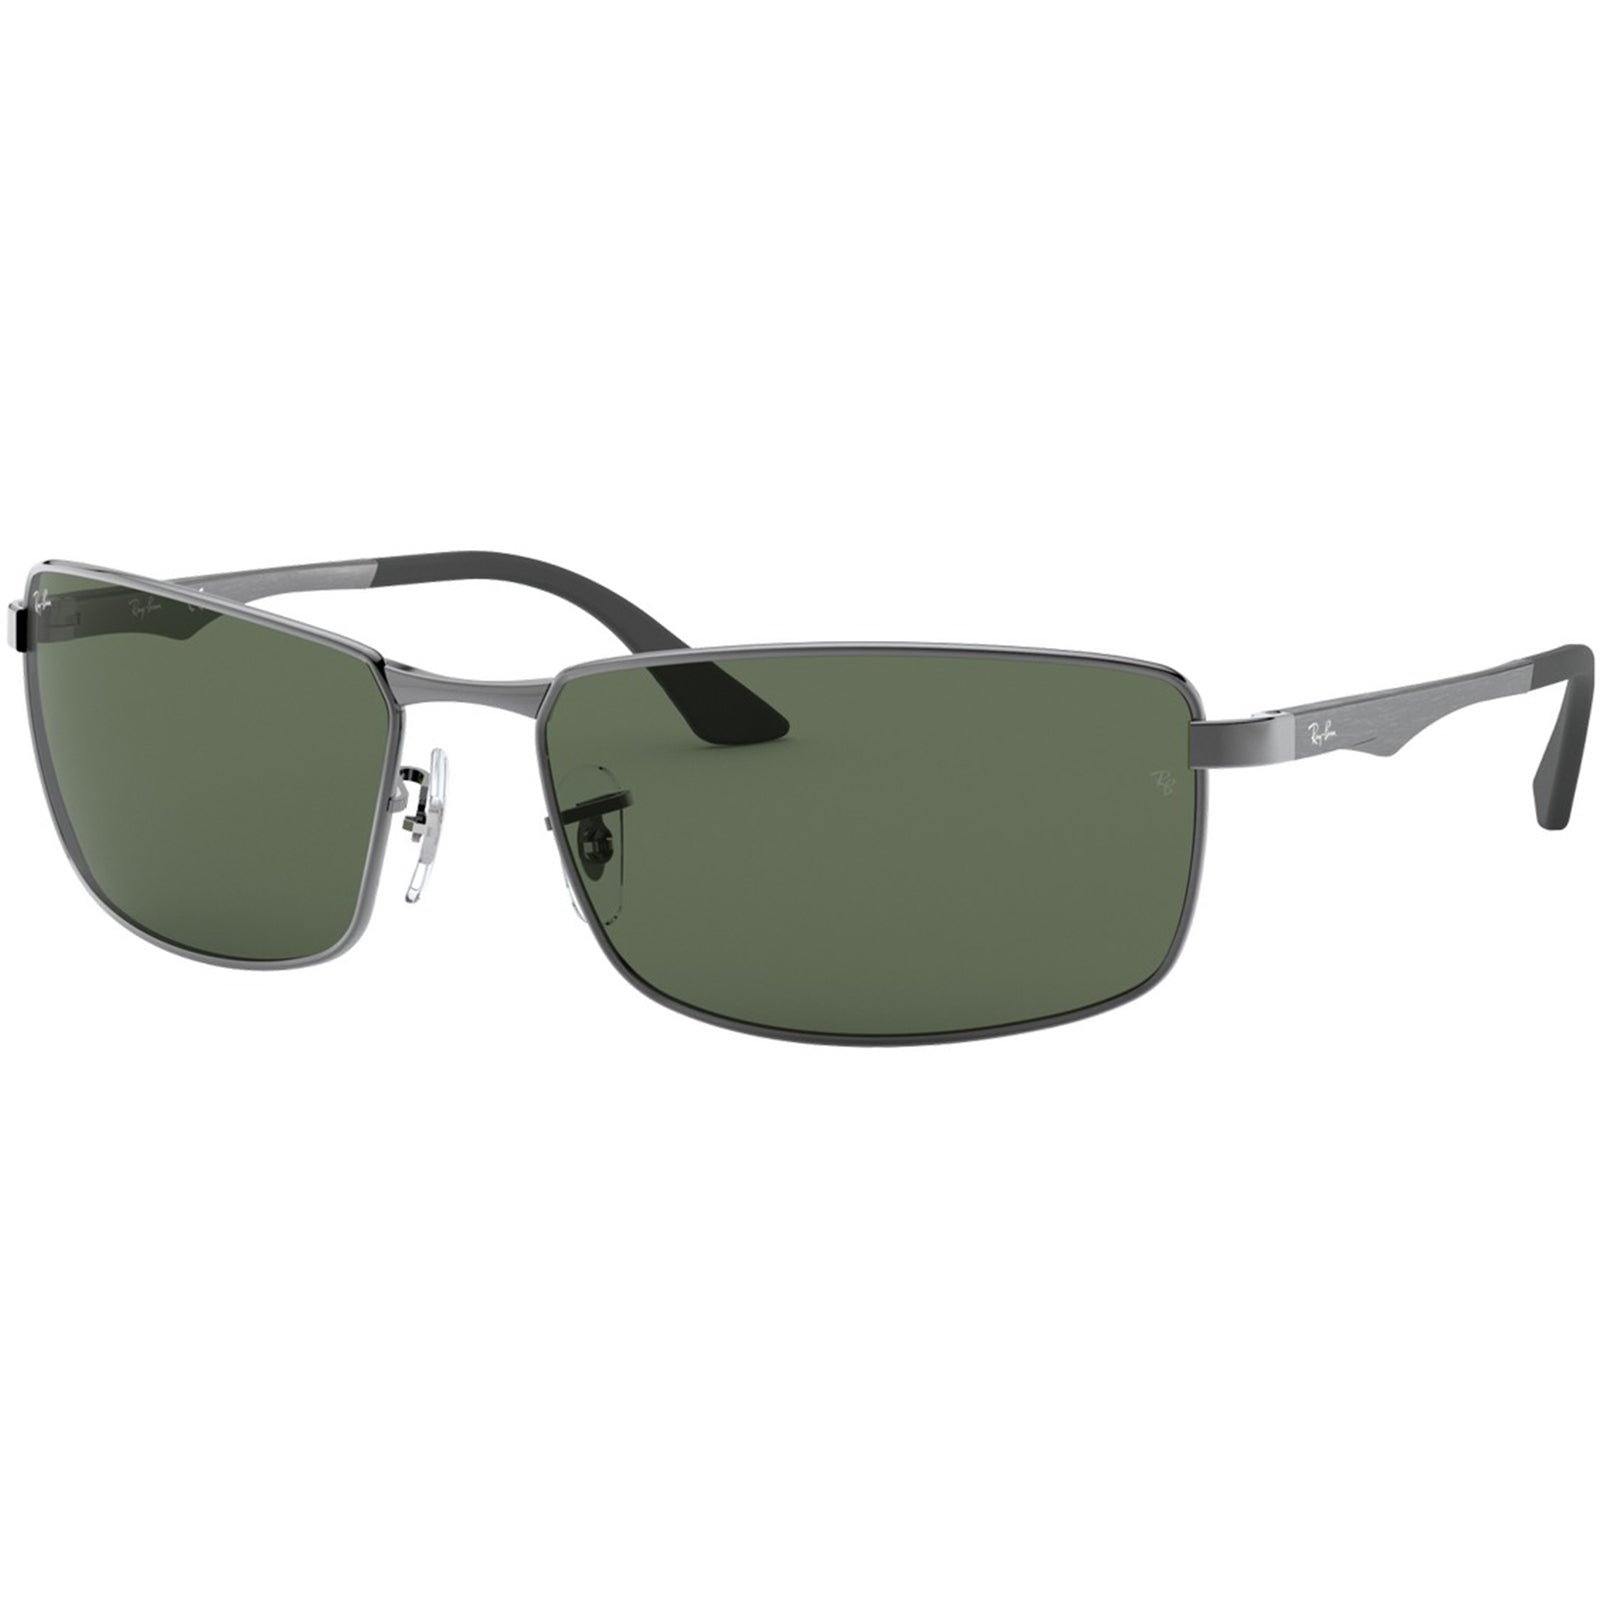 Ray-Ban RB3498 Adult Lifestyle Sunglasses-0RB3498